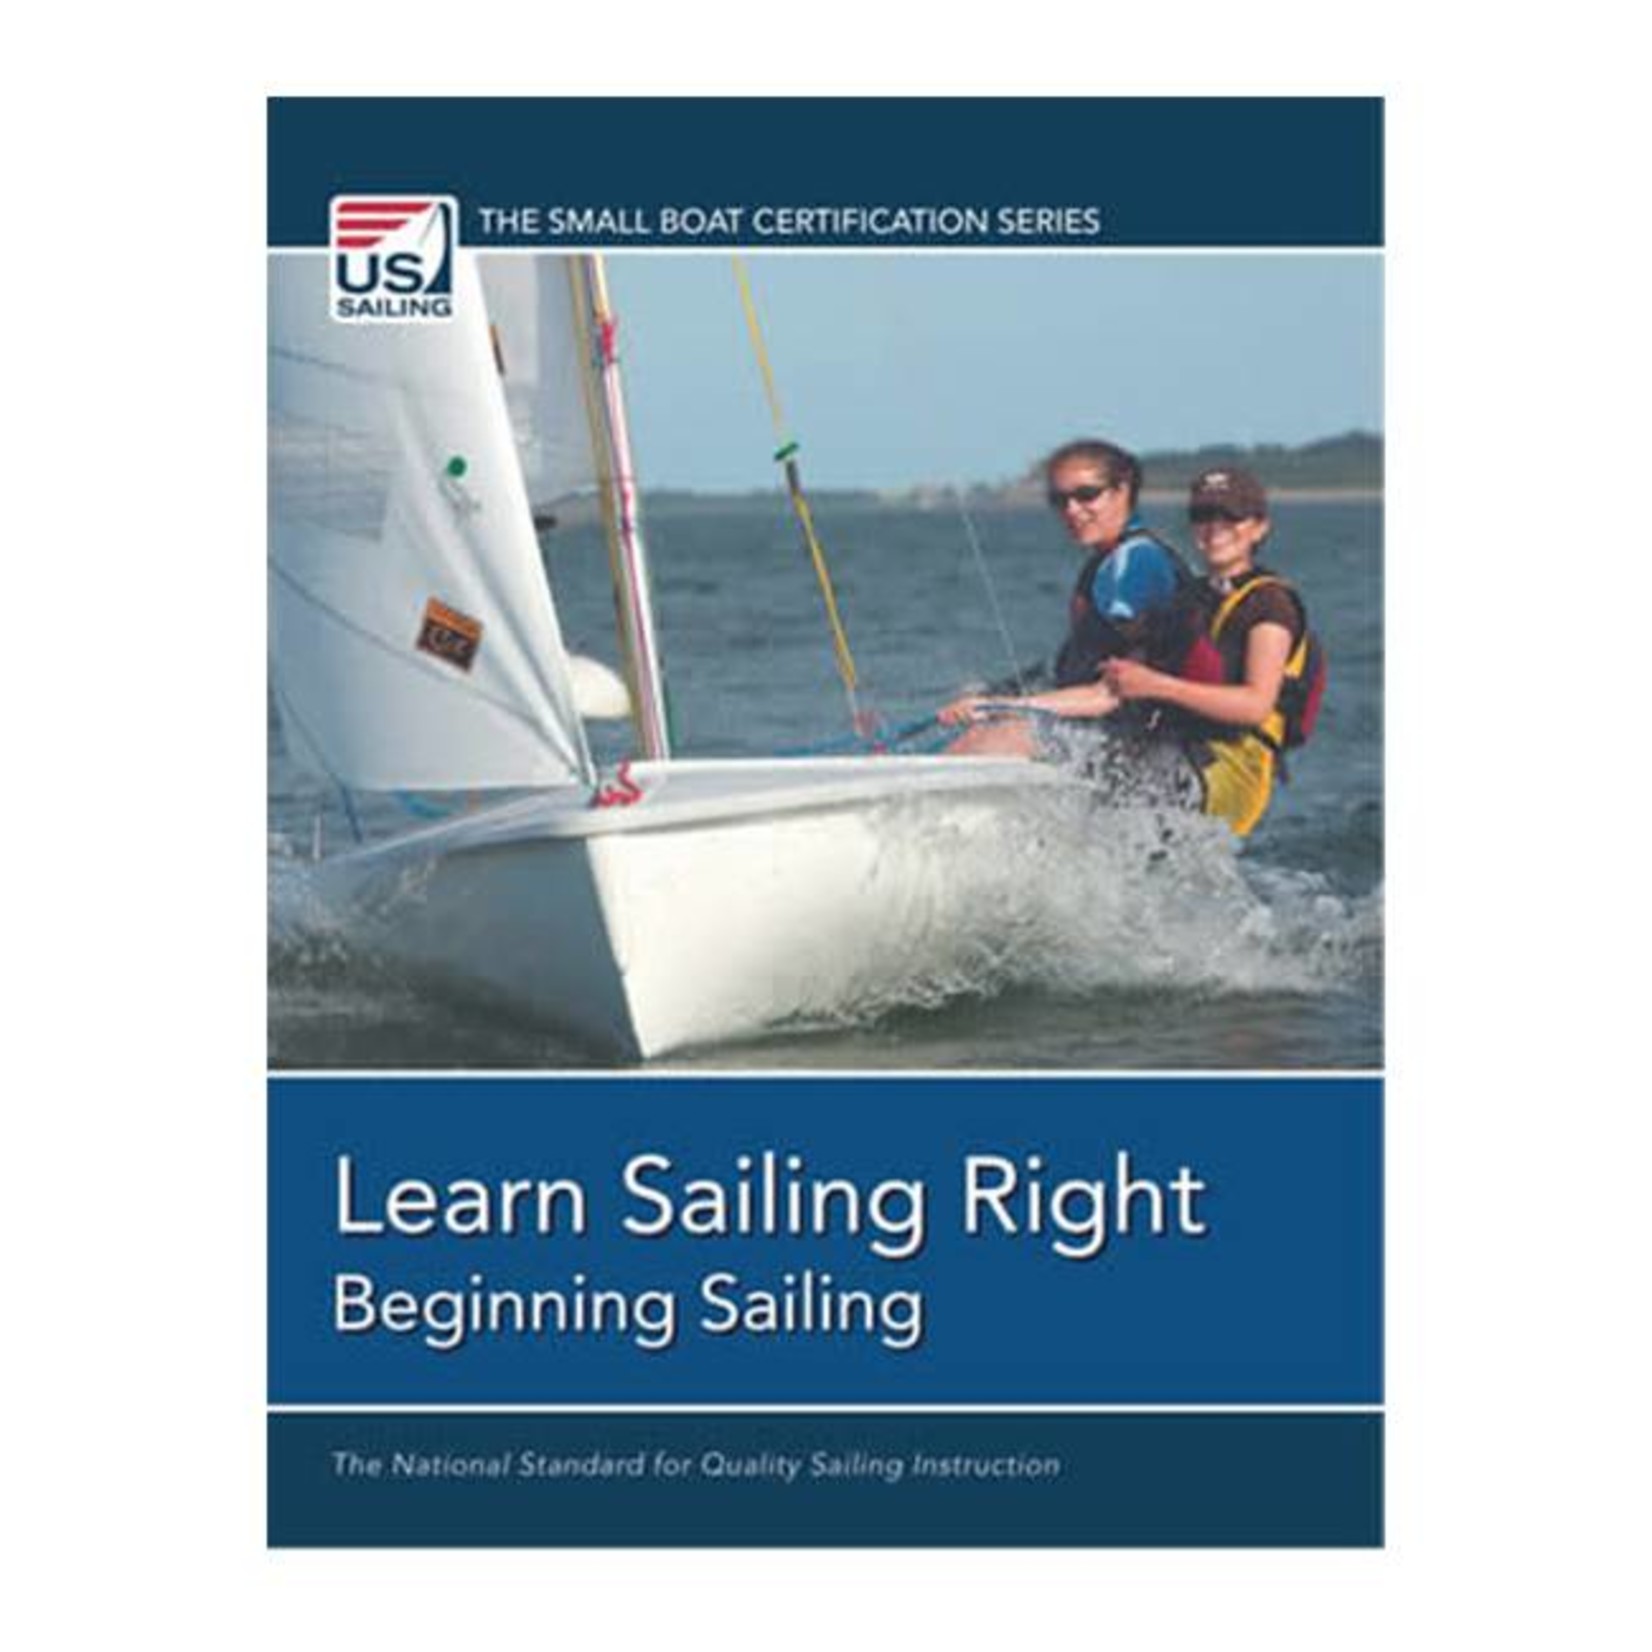 Learn Sailing Right- Beginner